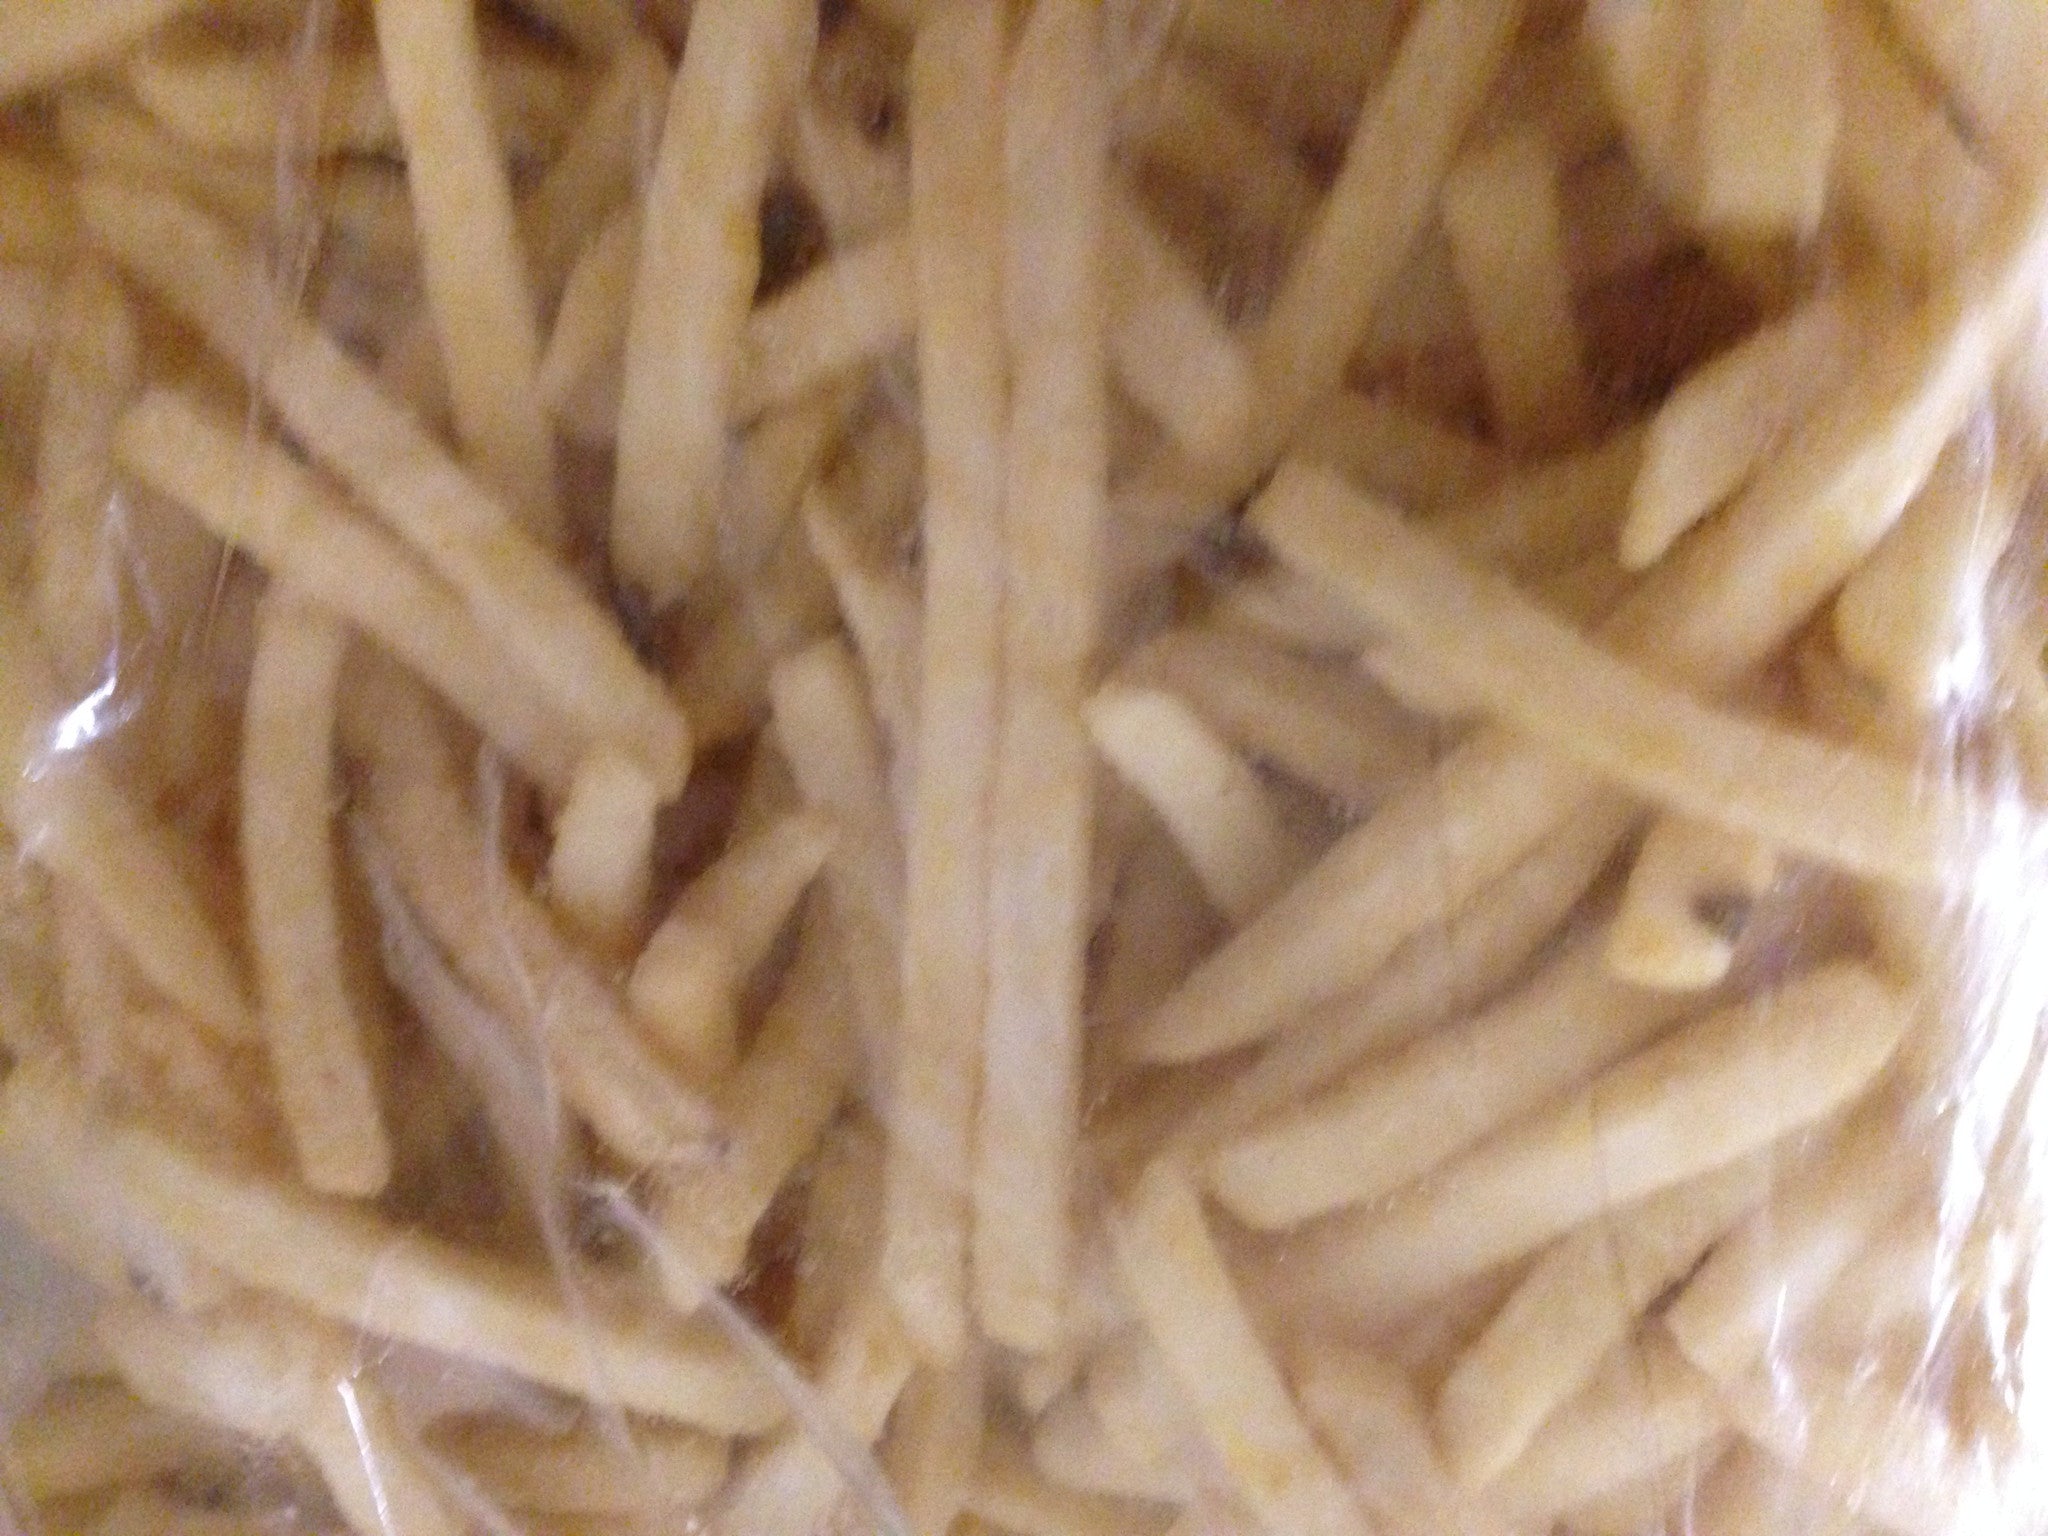 Straight-Cut French Fries - 3/8